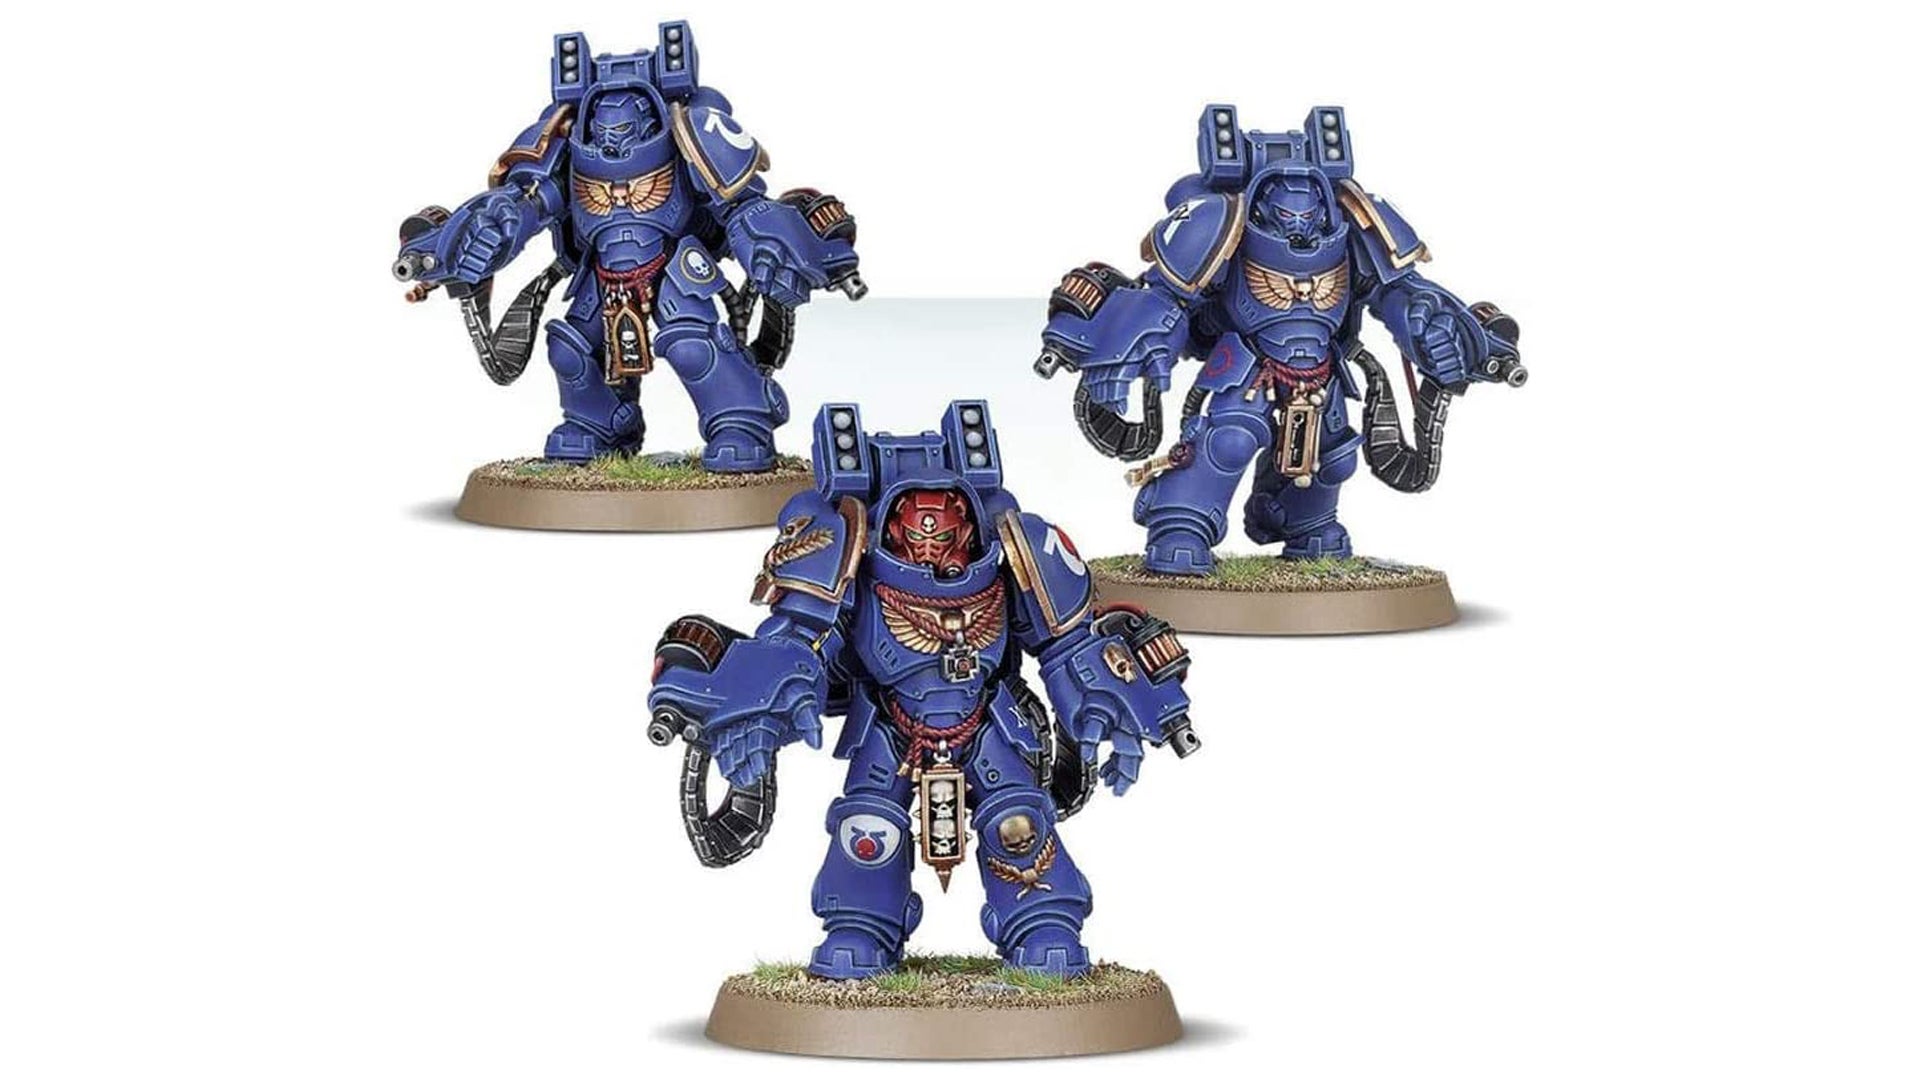 An image of some Warhammer 40k Space Marine Primaris Aggressors